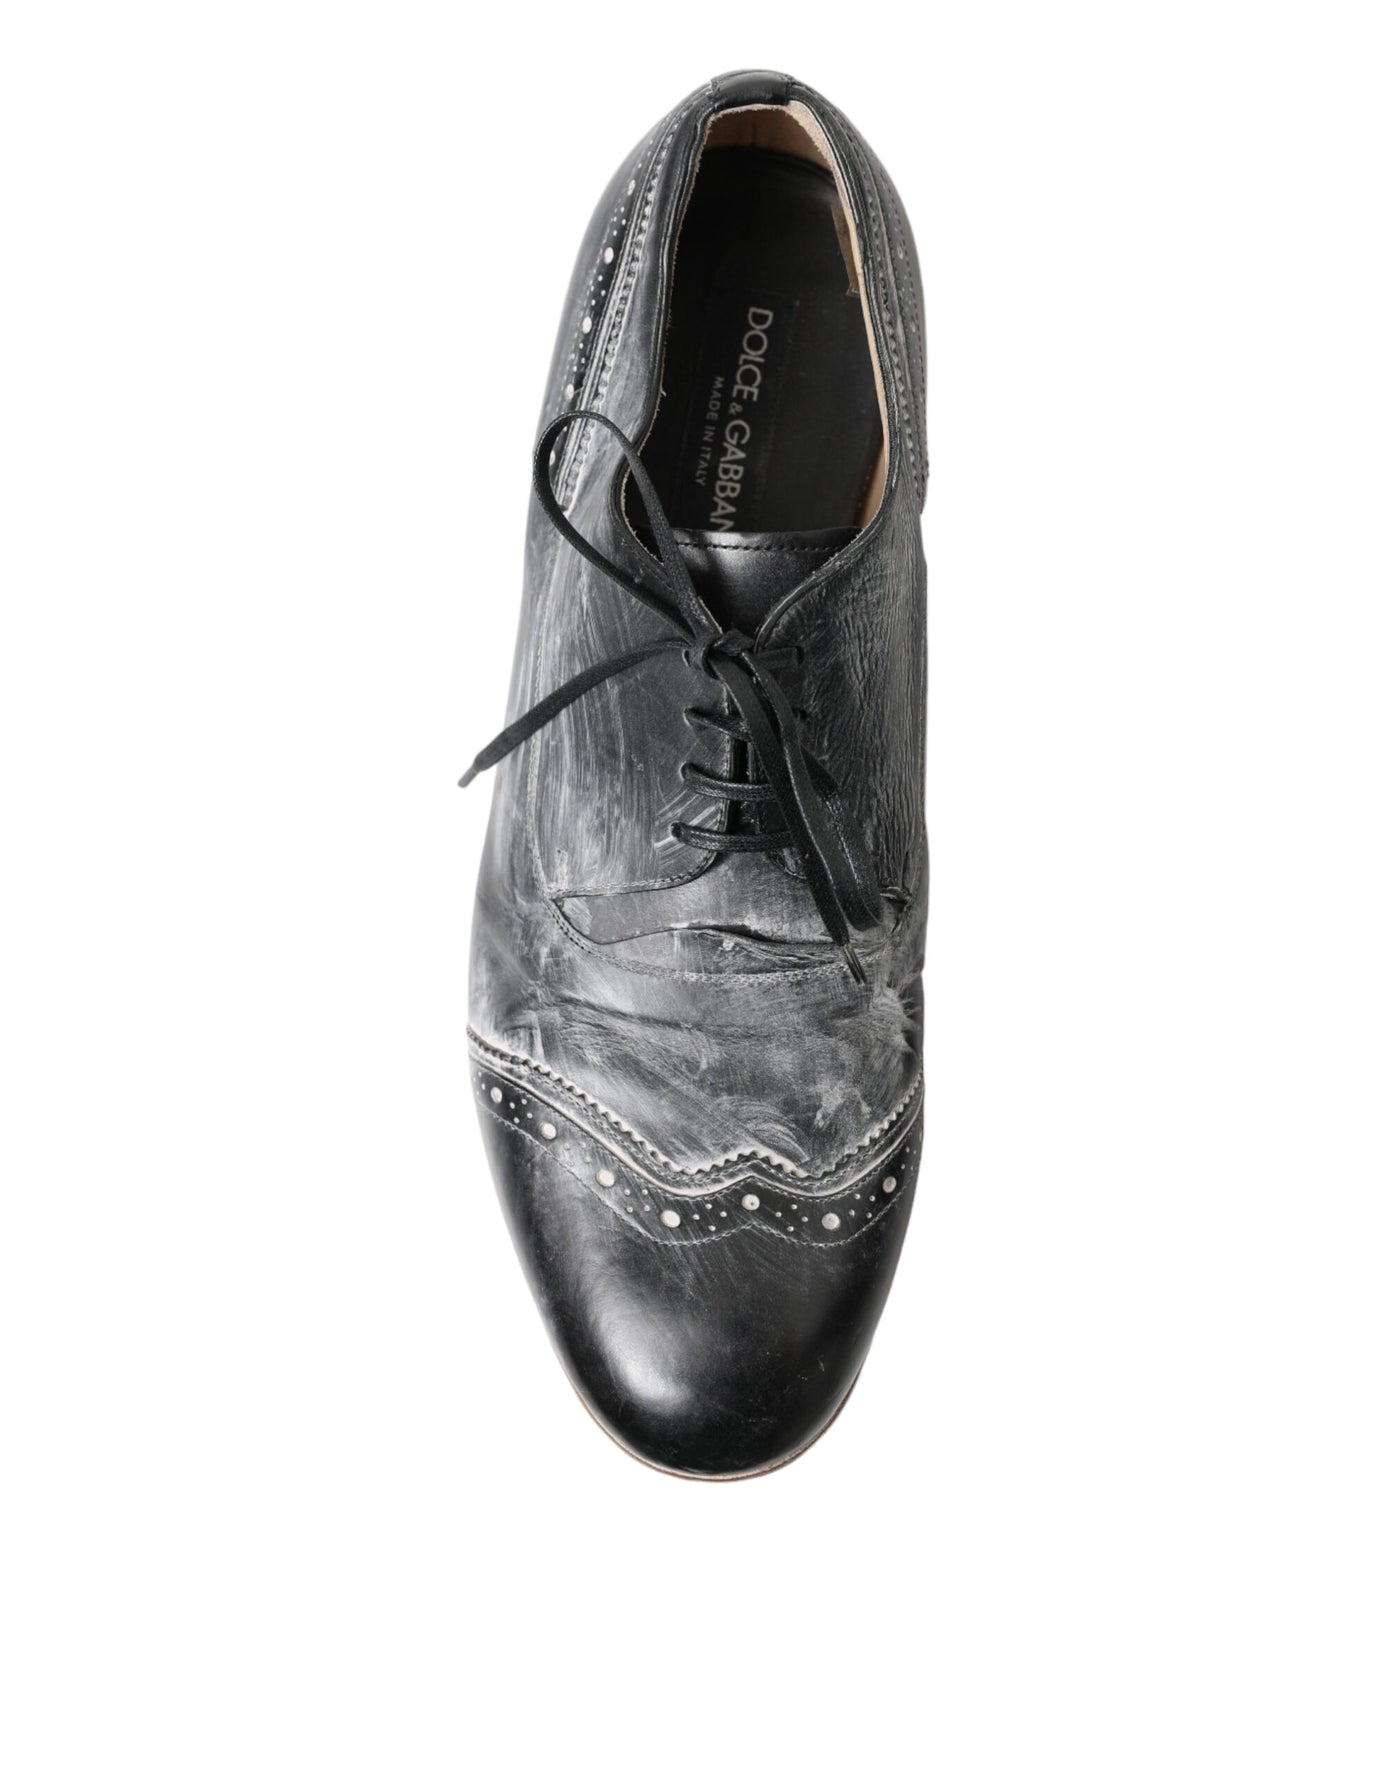 Dolce & Gabbana Black Leather Lace Up Formal Derby Dress Shoes